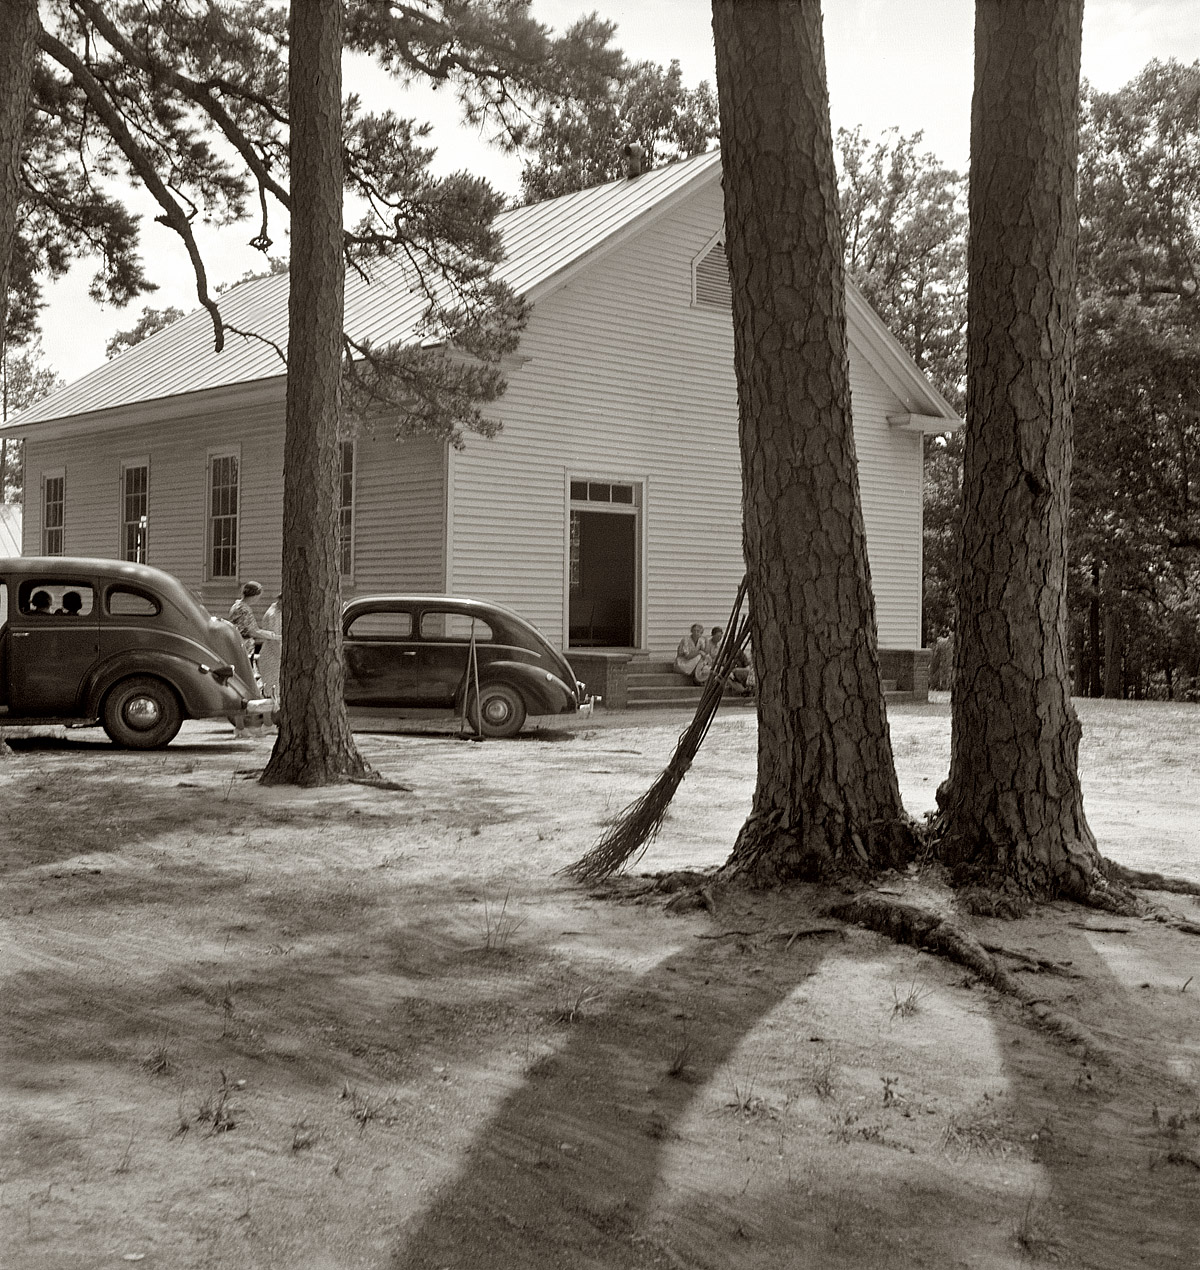 July 1939. "Churchyard on annual cleaning up day, Wheeley's Church, Person County, N.C." View full size. Medium-format nitrate negative by Dorothea Lange. Note the homemade twig brooms propped against the pine. From an earlier post, a group shot of the ladies. Is the church, in Gordonton, still there?